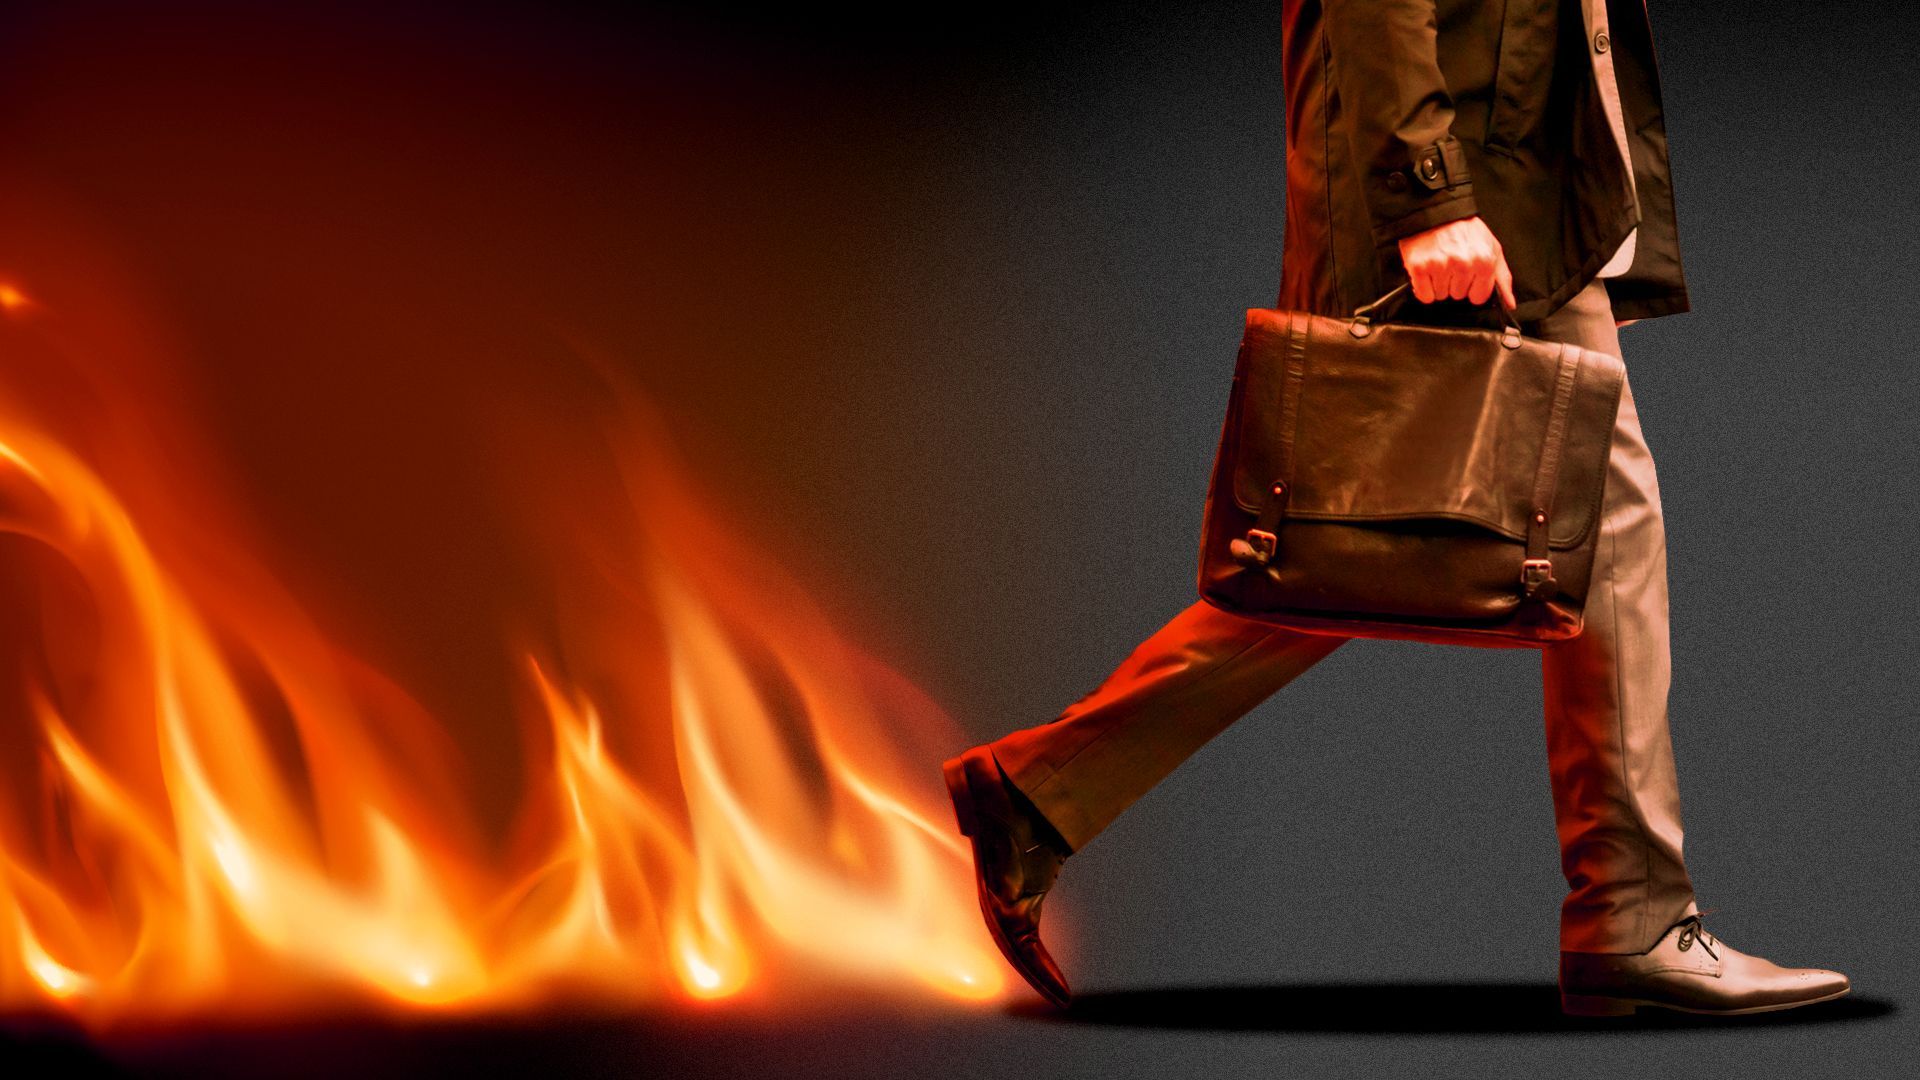 Illustration of a suited business person walking away with a briefcase in hand and a trail of fiery flames behind them